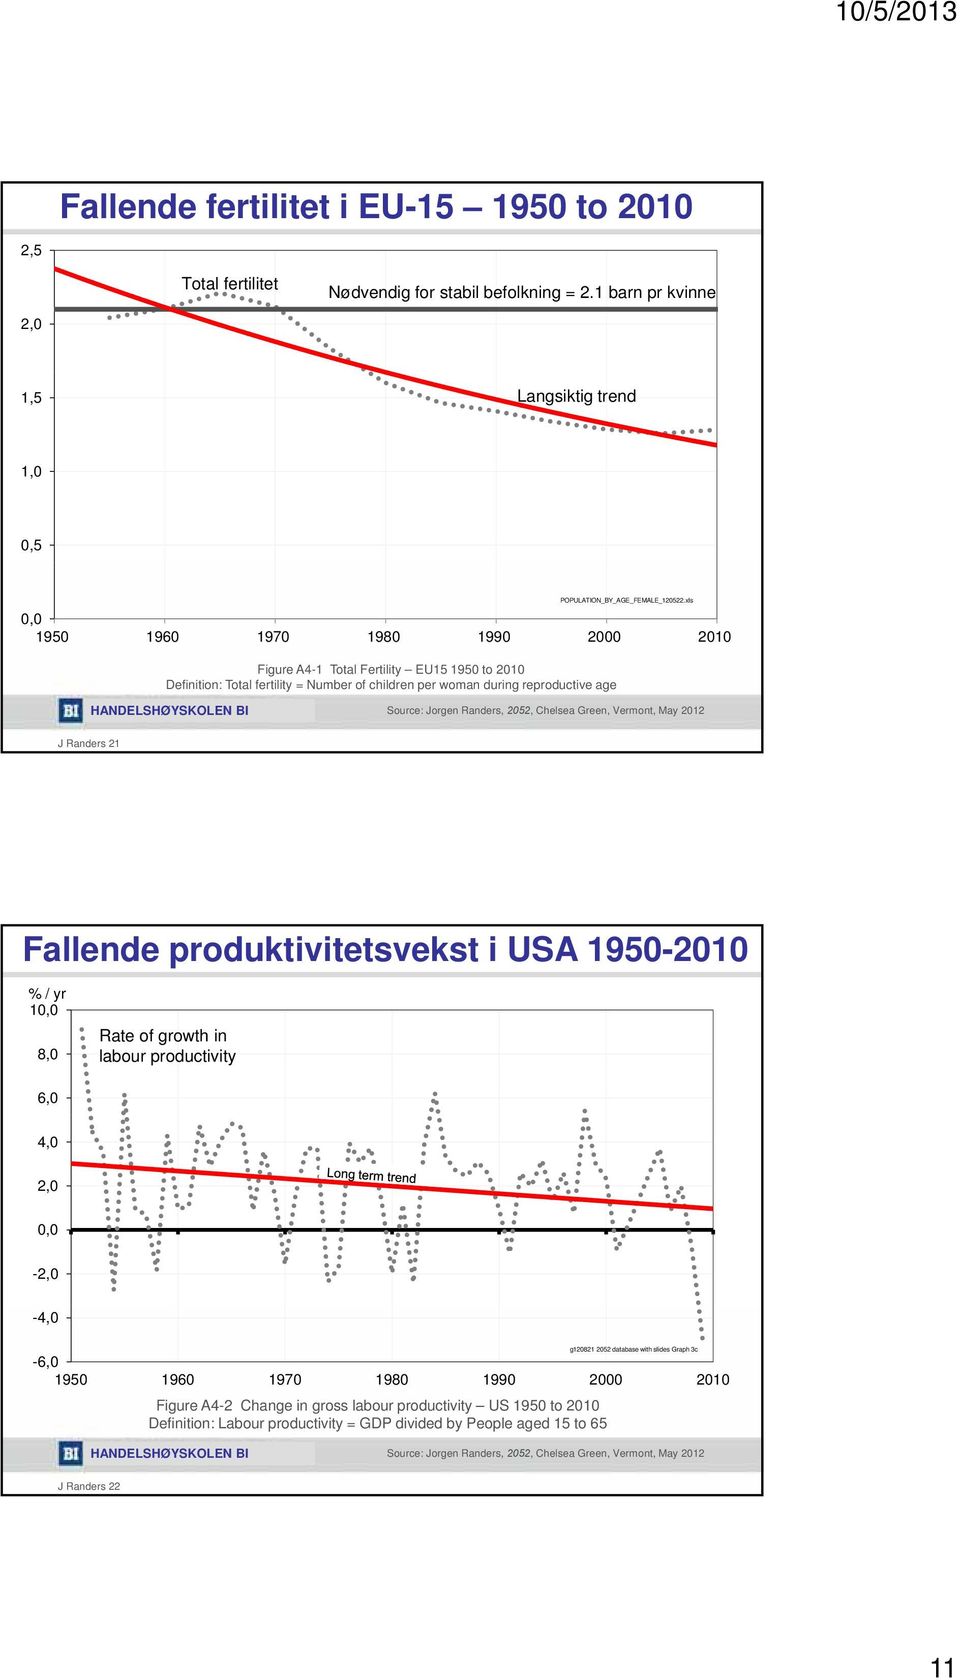 Green, Vermont, May J Randers Fallende produktivitetsvekst i USA 9- % / yr, 8, Rate of growth in labour productivity 6,,,, -, -, g8 database with slides Graph c -6, 9 96